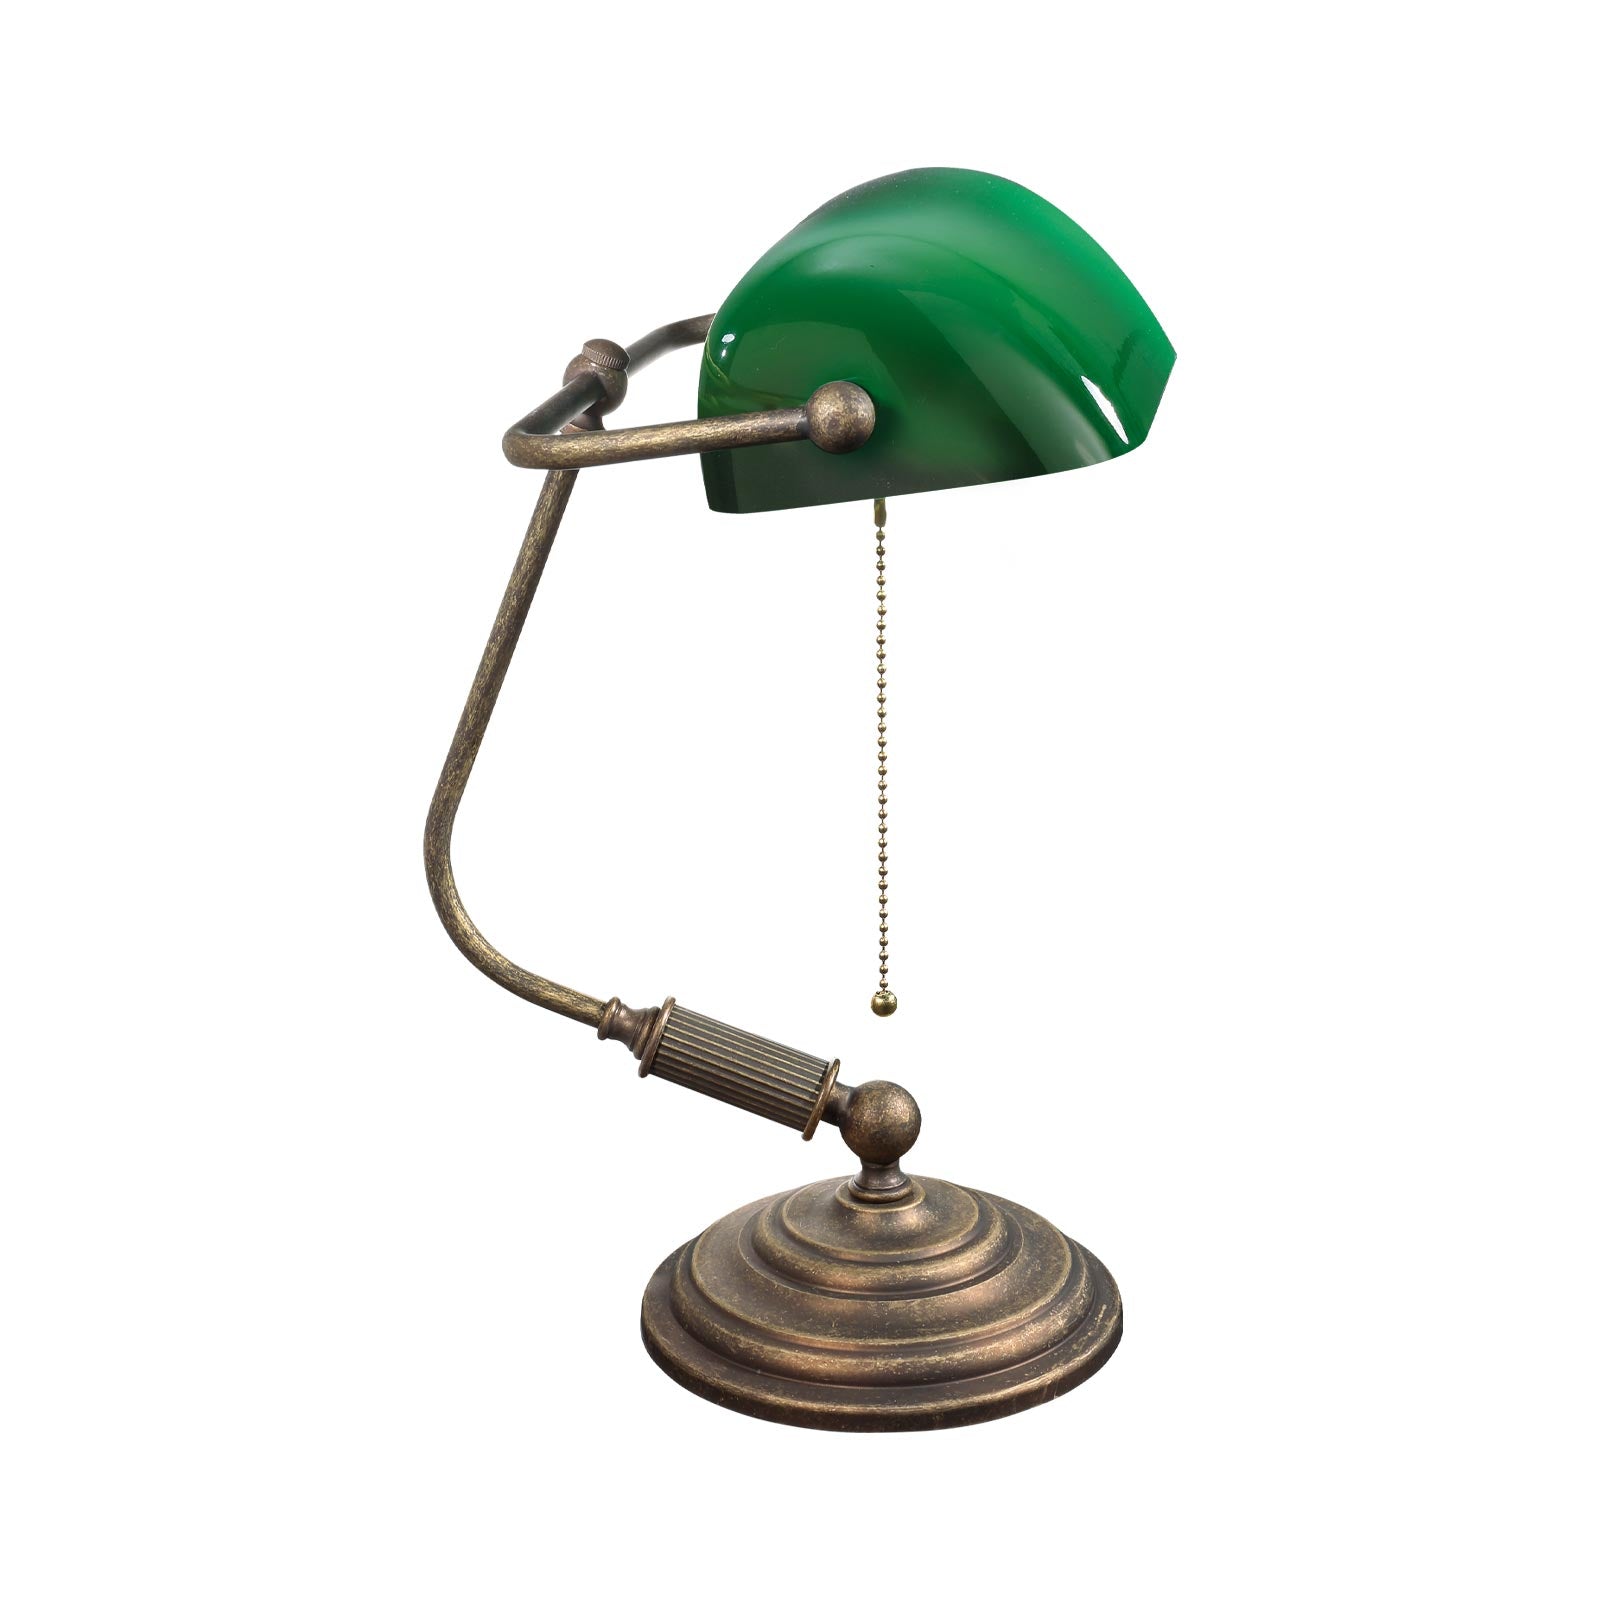 http://ghidini1849.com/cdn/shop/files/antique-brass-bankers-lamp-with-green-glass-shade-by-ghidini-1849-1.jpg?v=1688731562